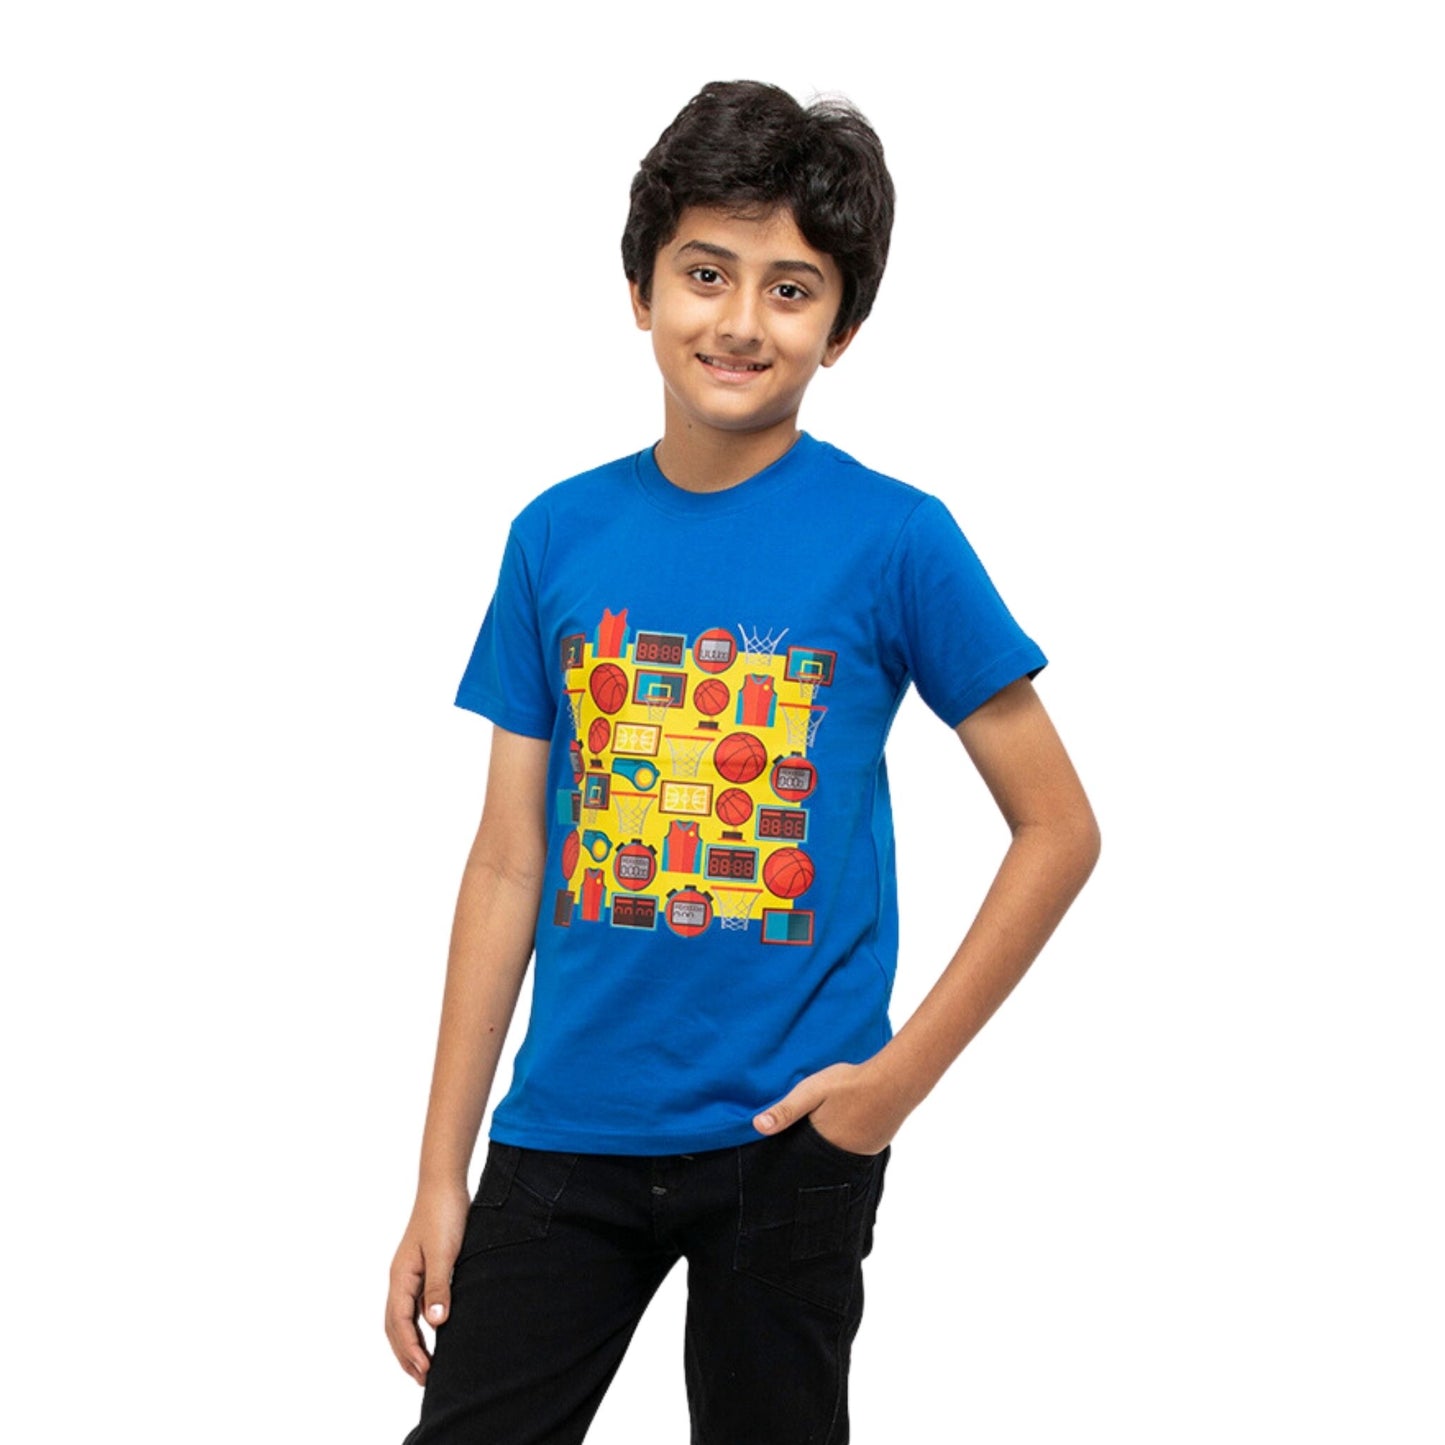 A Boy wearing stylish, affordable & premium Basketball Print Blue Cotton T-Shirt from getstocked